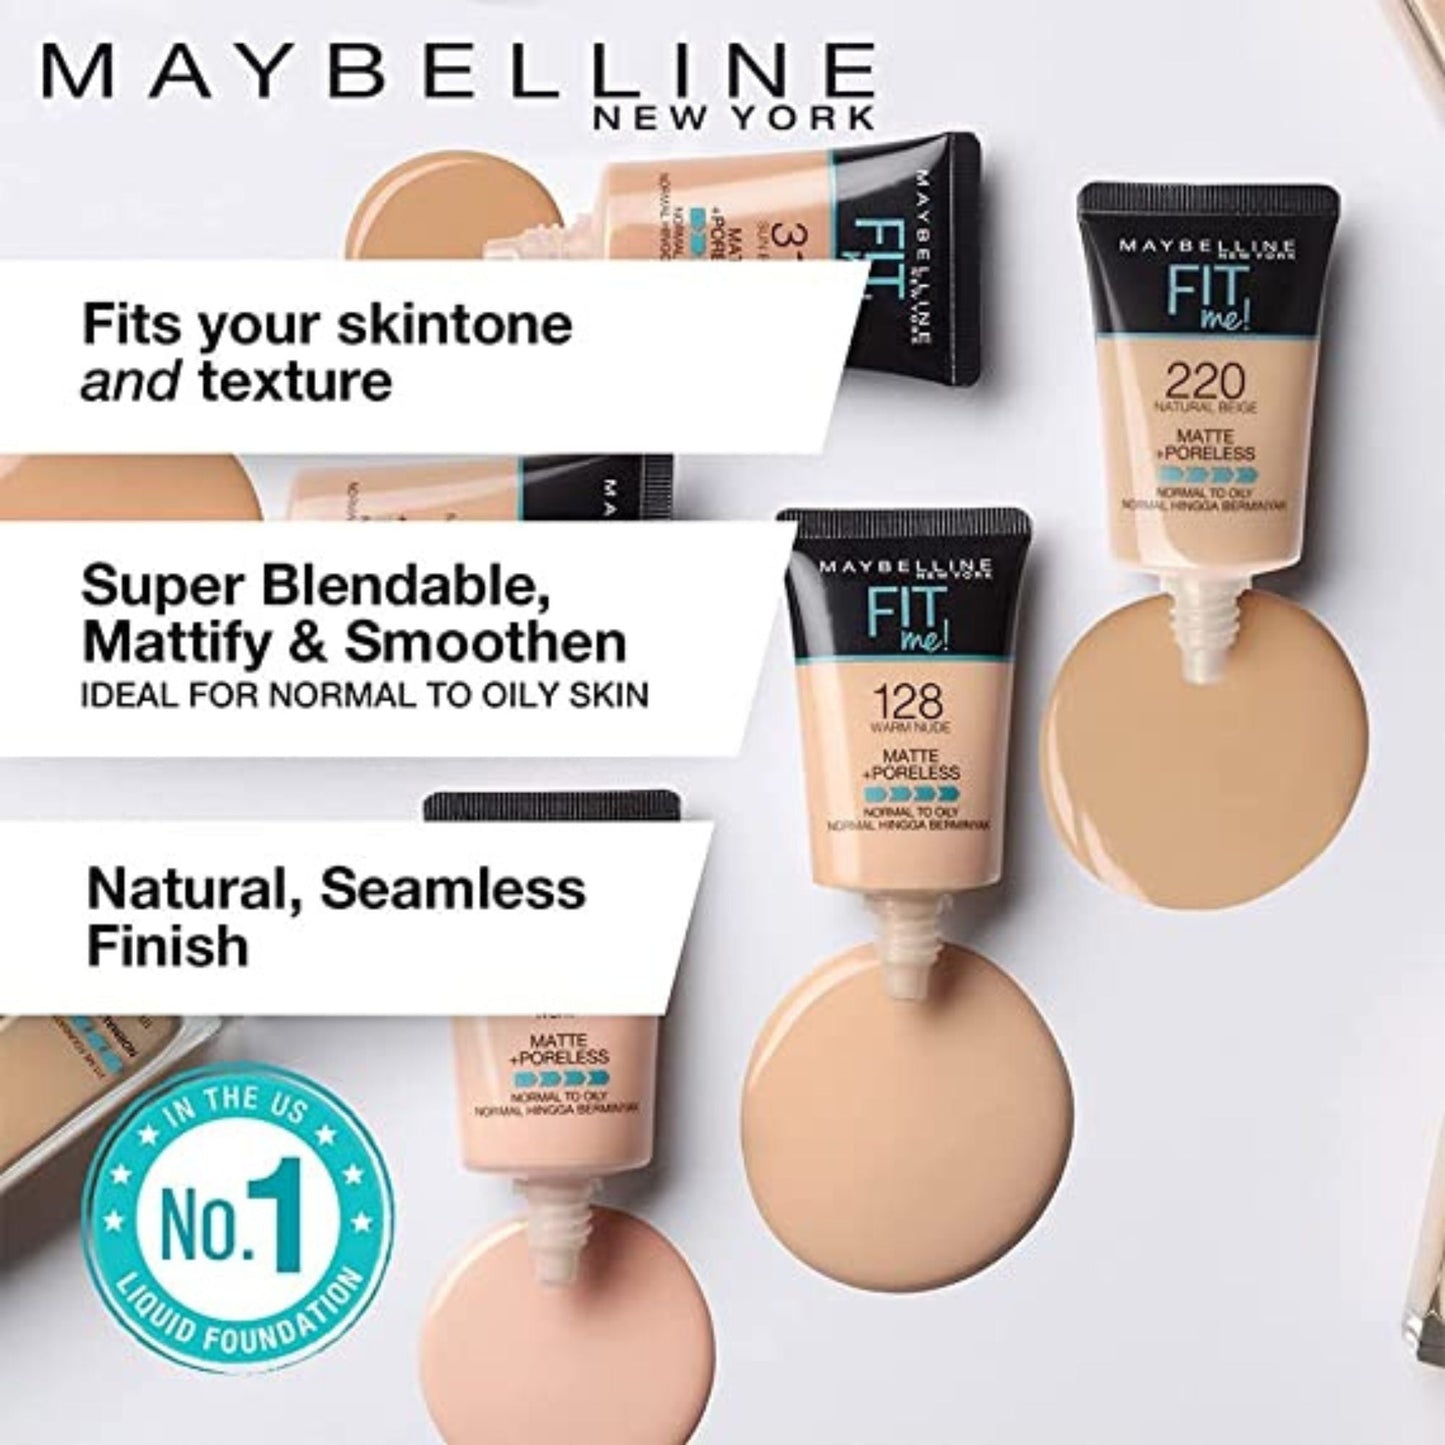 Maybelline New York Liquid Foundation, Matte & Poreless, Full Coverage Blendable Normal to Oily Skin, Fit Me, 115 Ivory